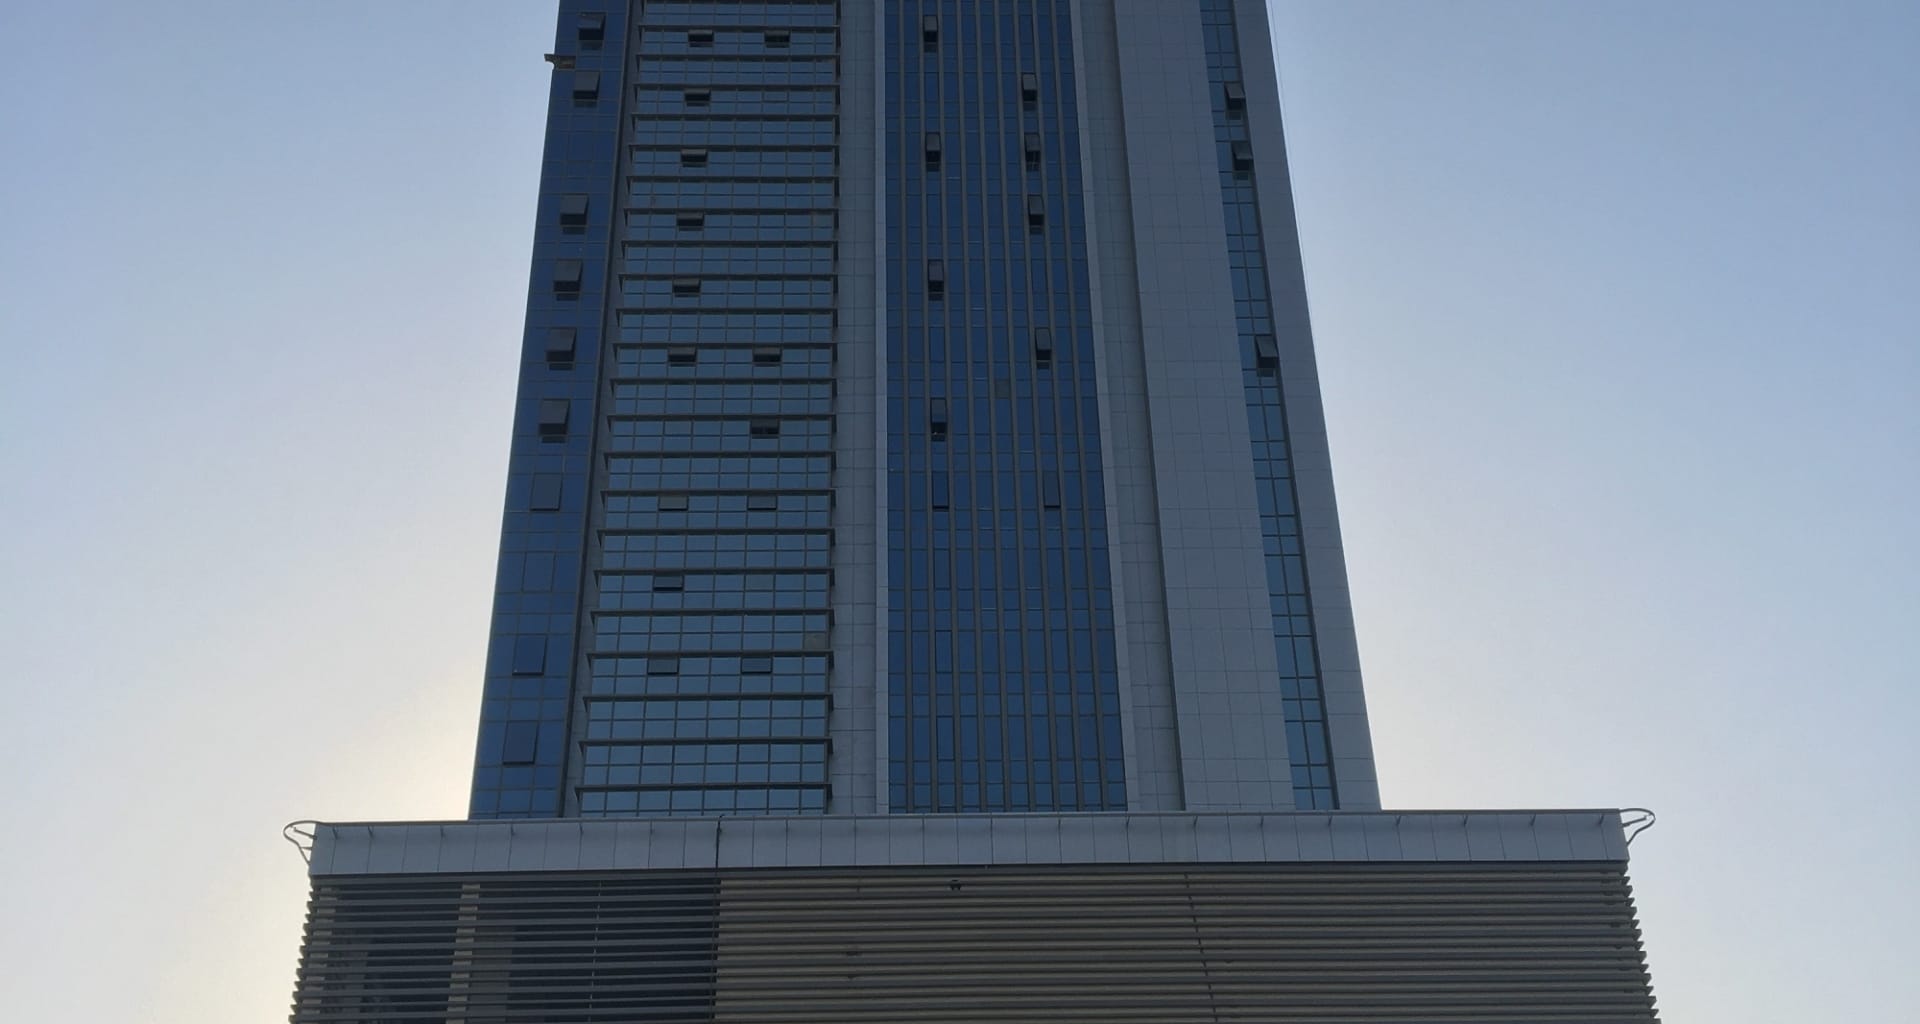 The 37-storey AKH Tower